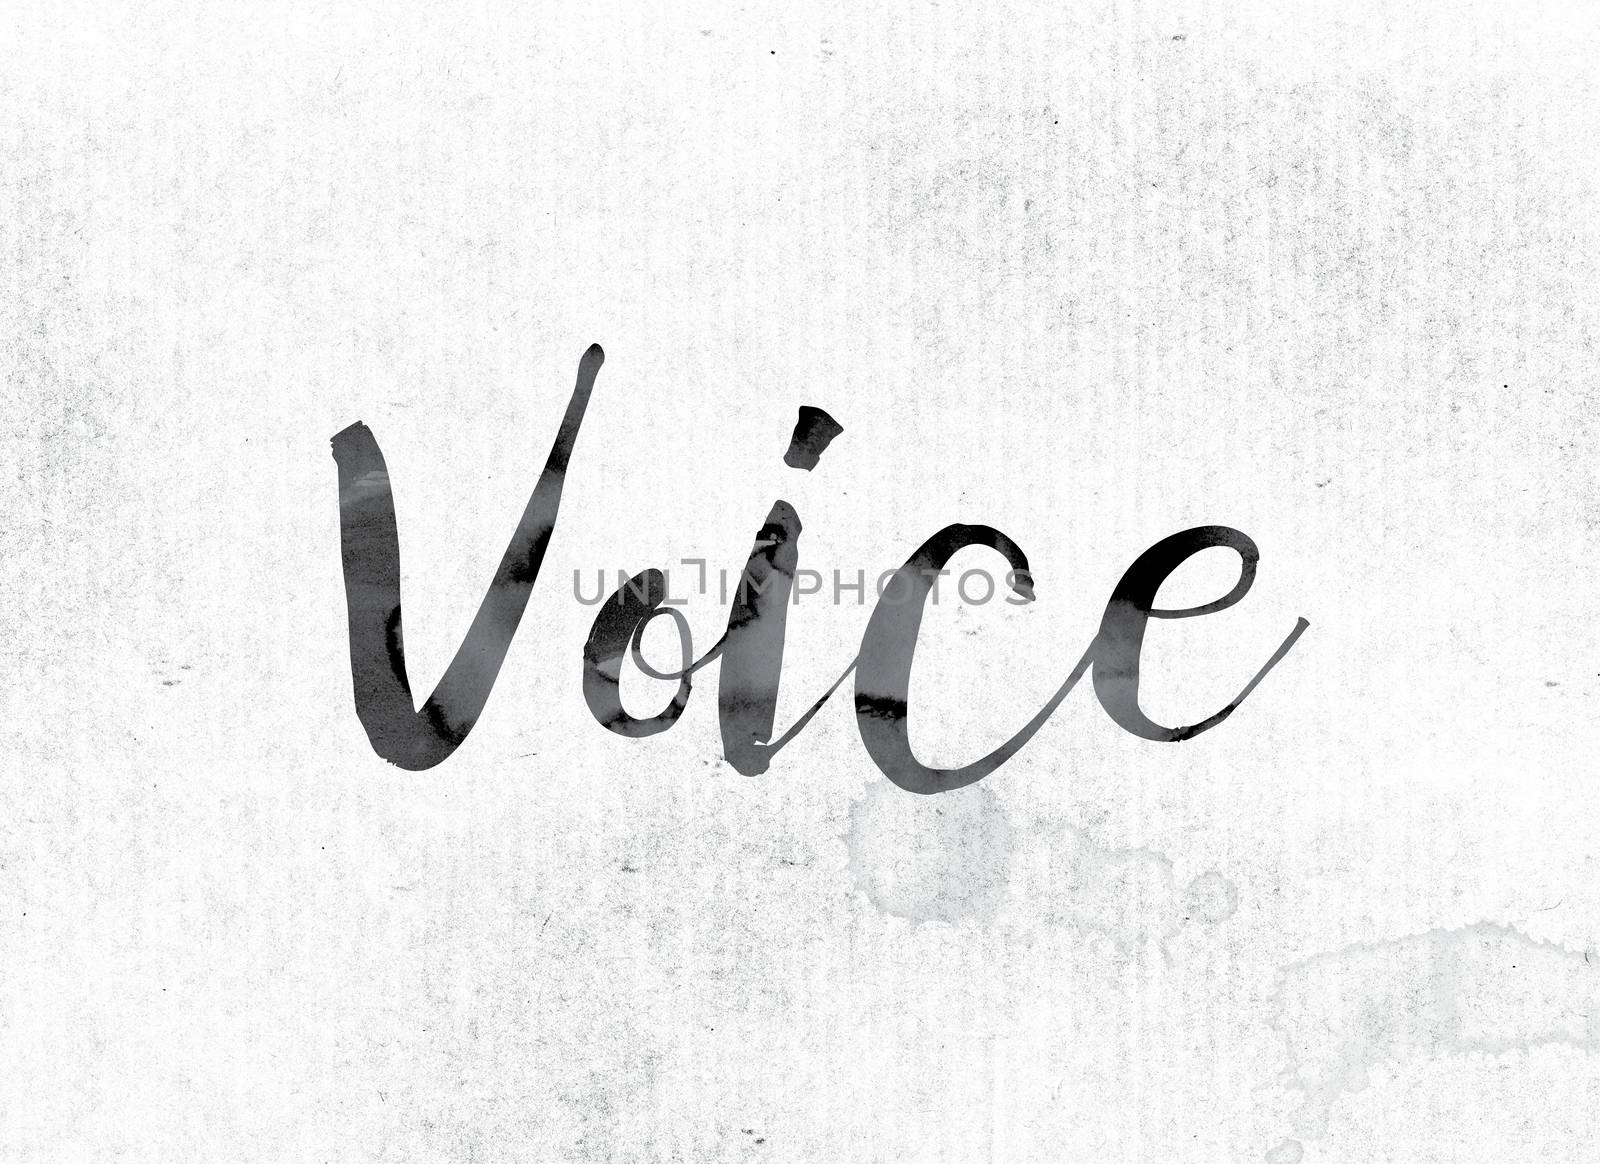 The word "Voice" concept and theme painted in watercolor ink on a white paper.